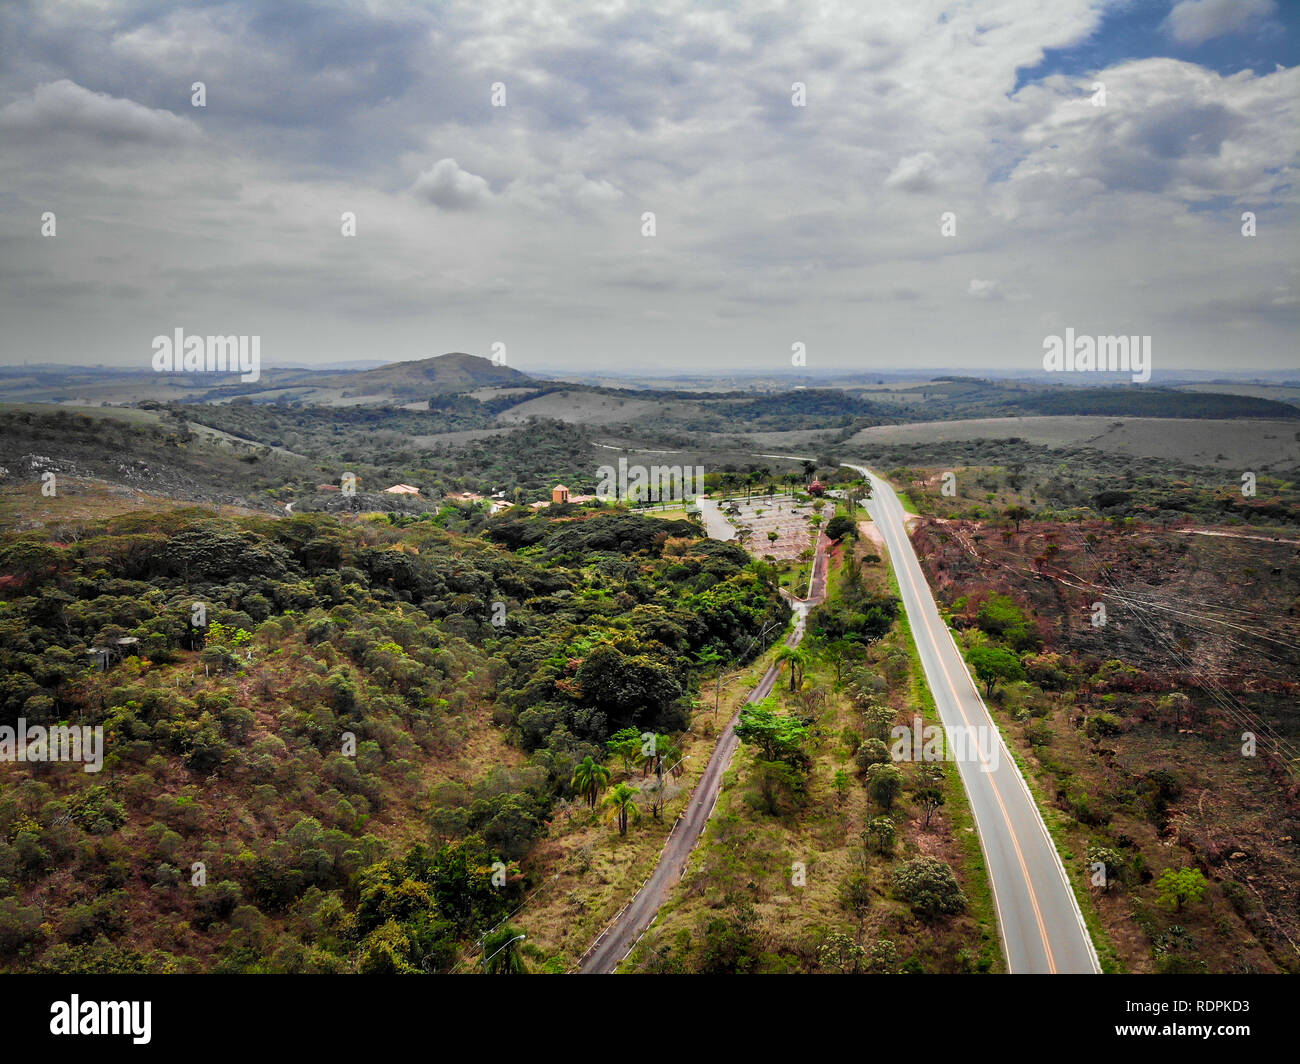 Wildlife and Nature at Lavras, Brazil Stock Photo - Alamy